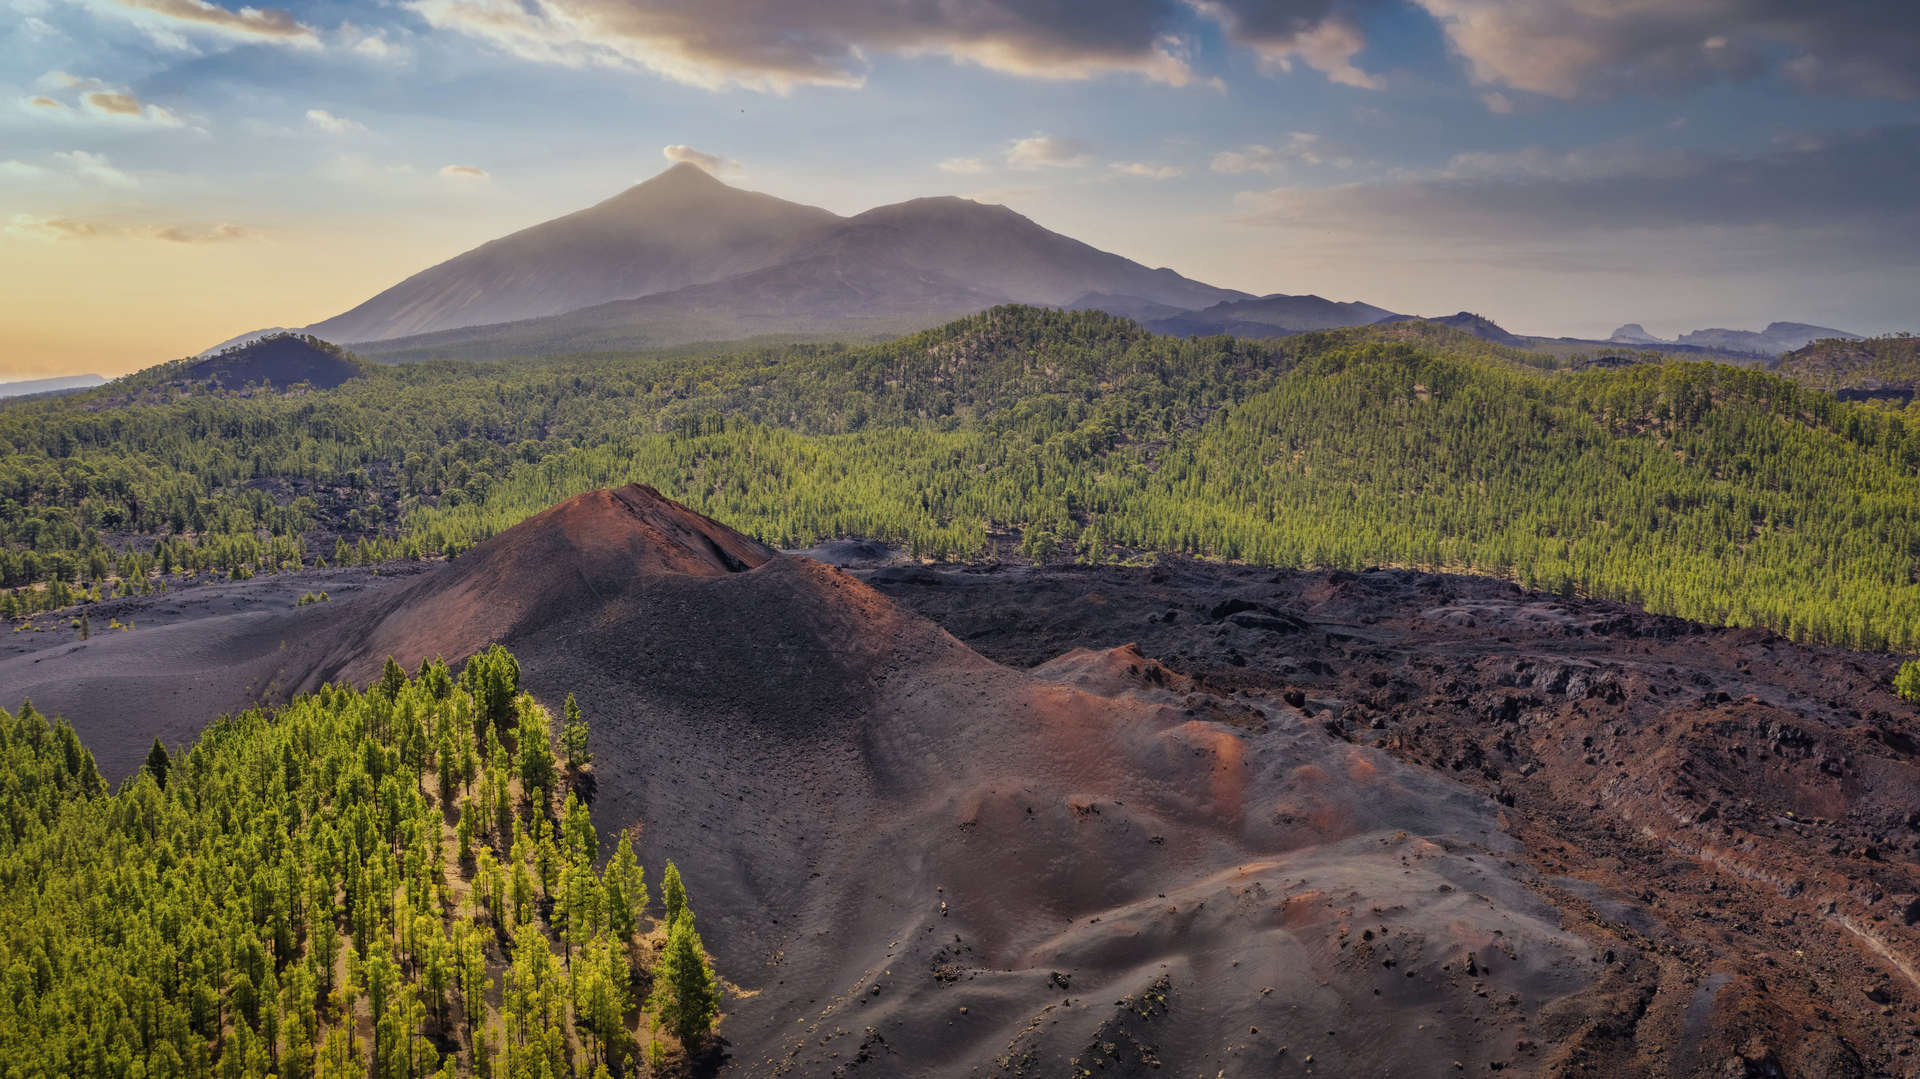 The towering centrepiece of Teide National Park is Mount Teide